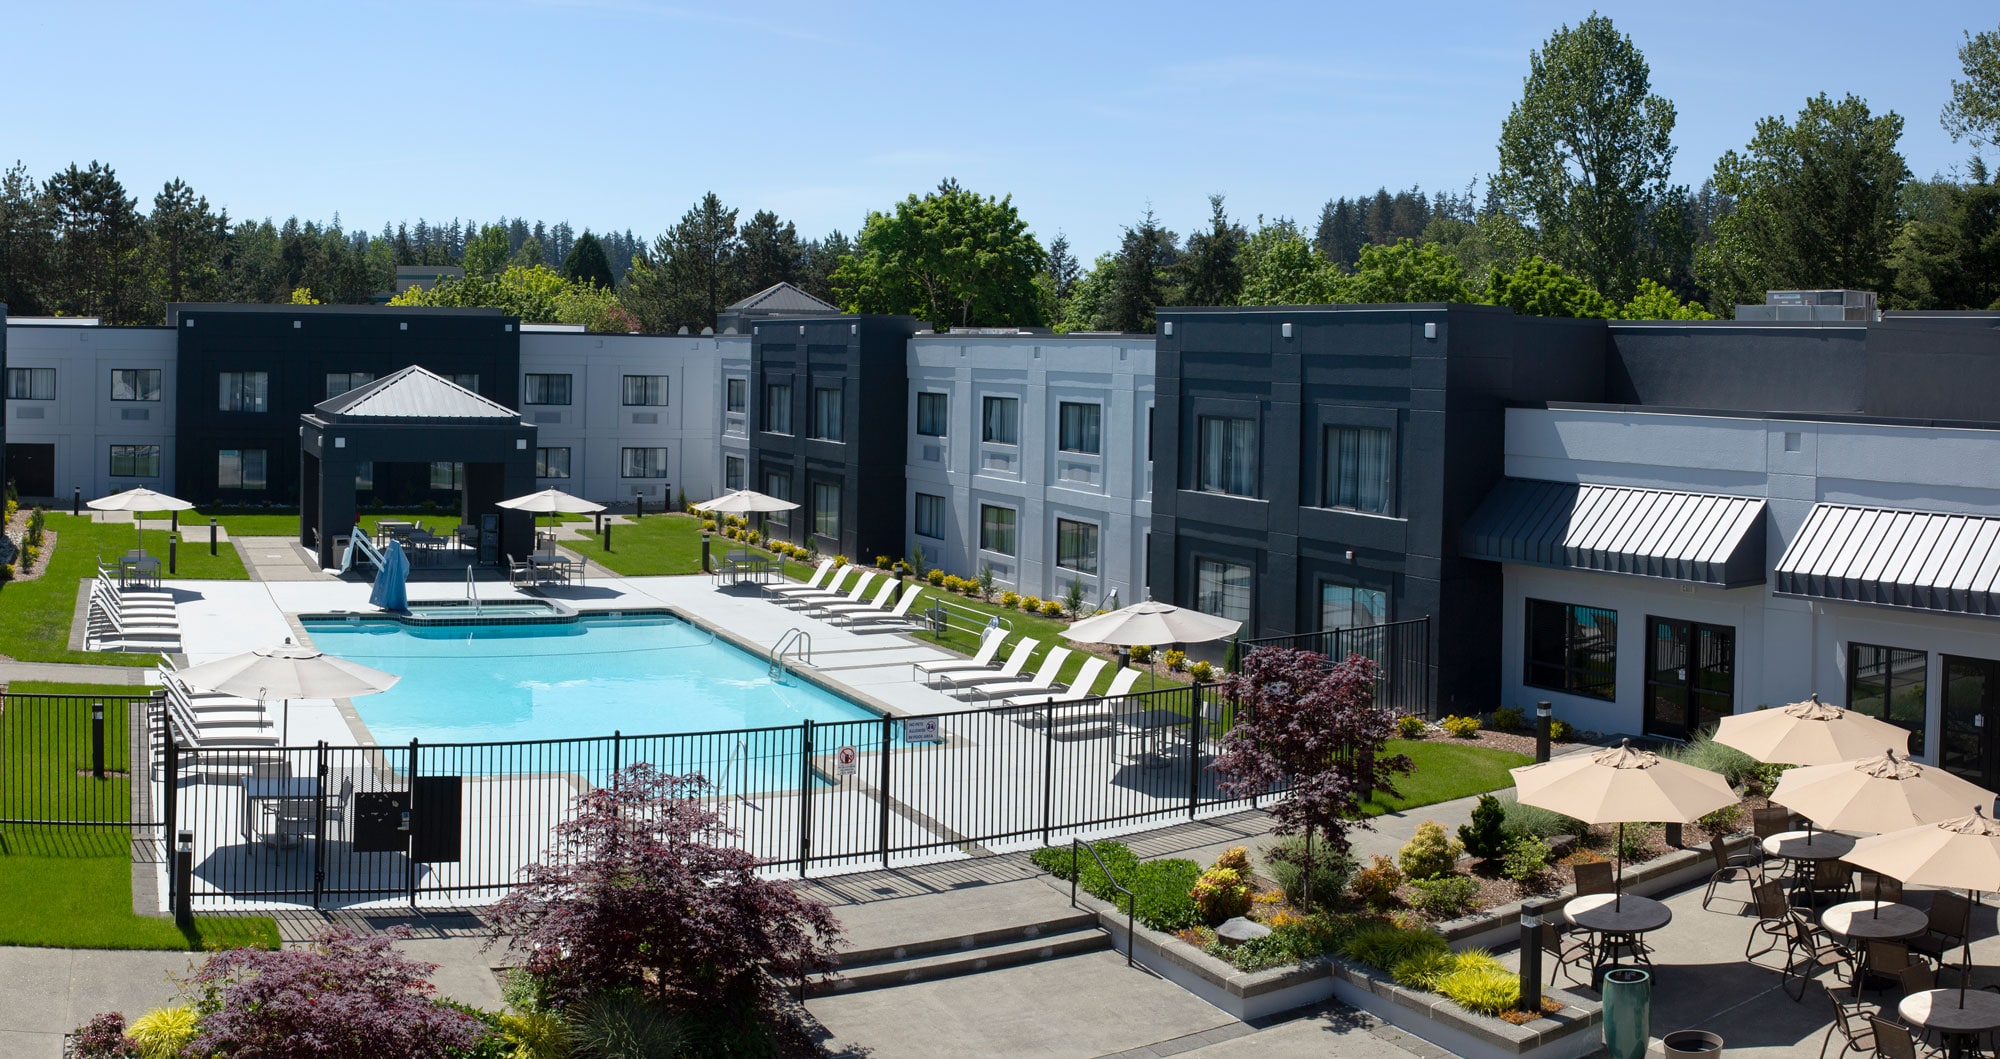 View of the courtyard pool at the Country Inn & Suites by Radisson in Bothell, WA.